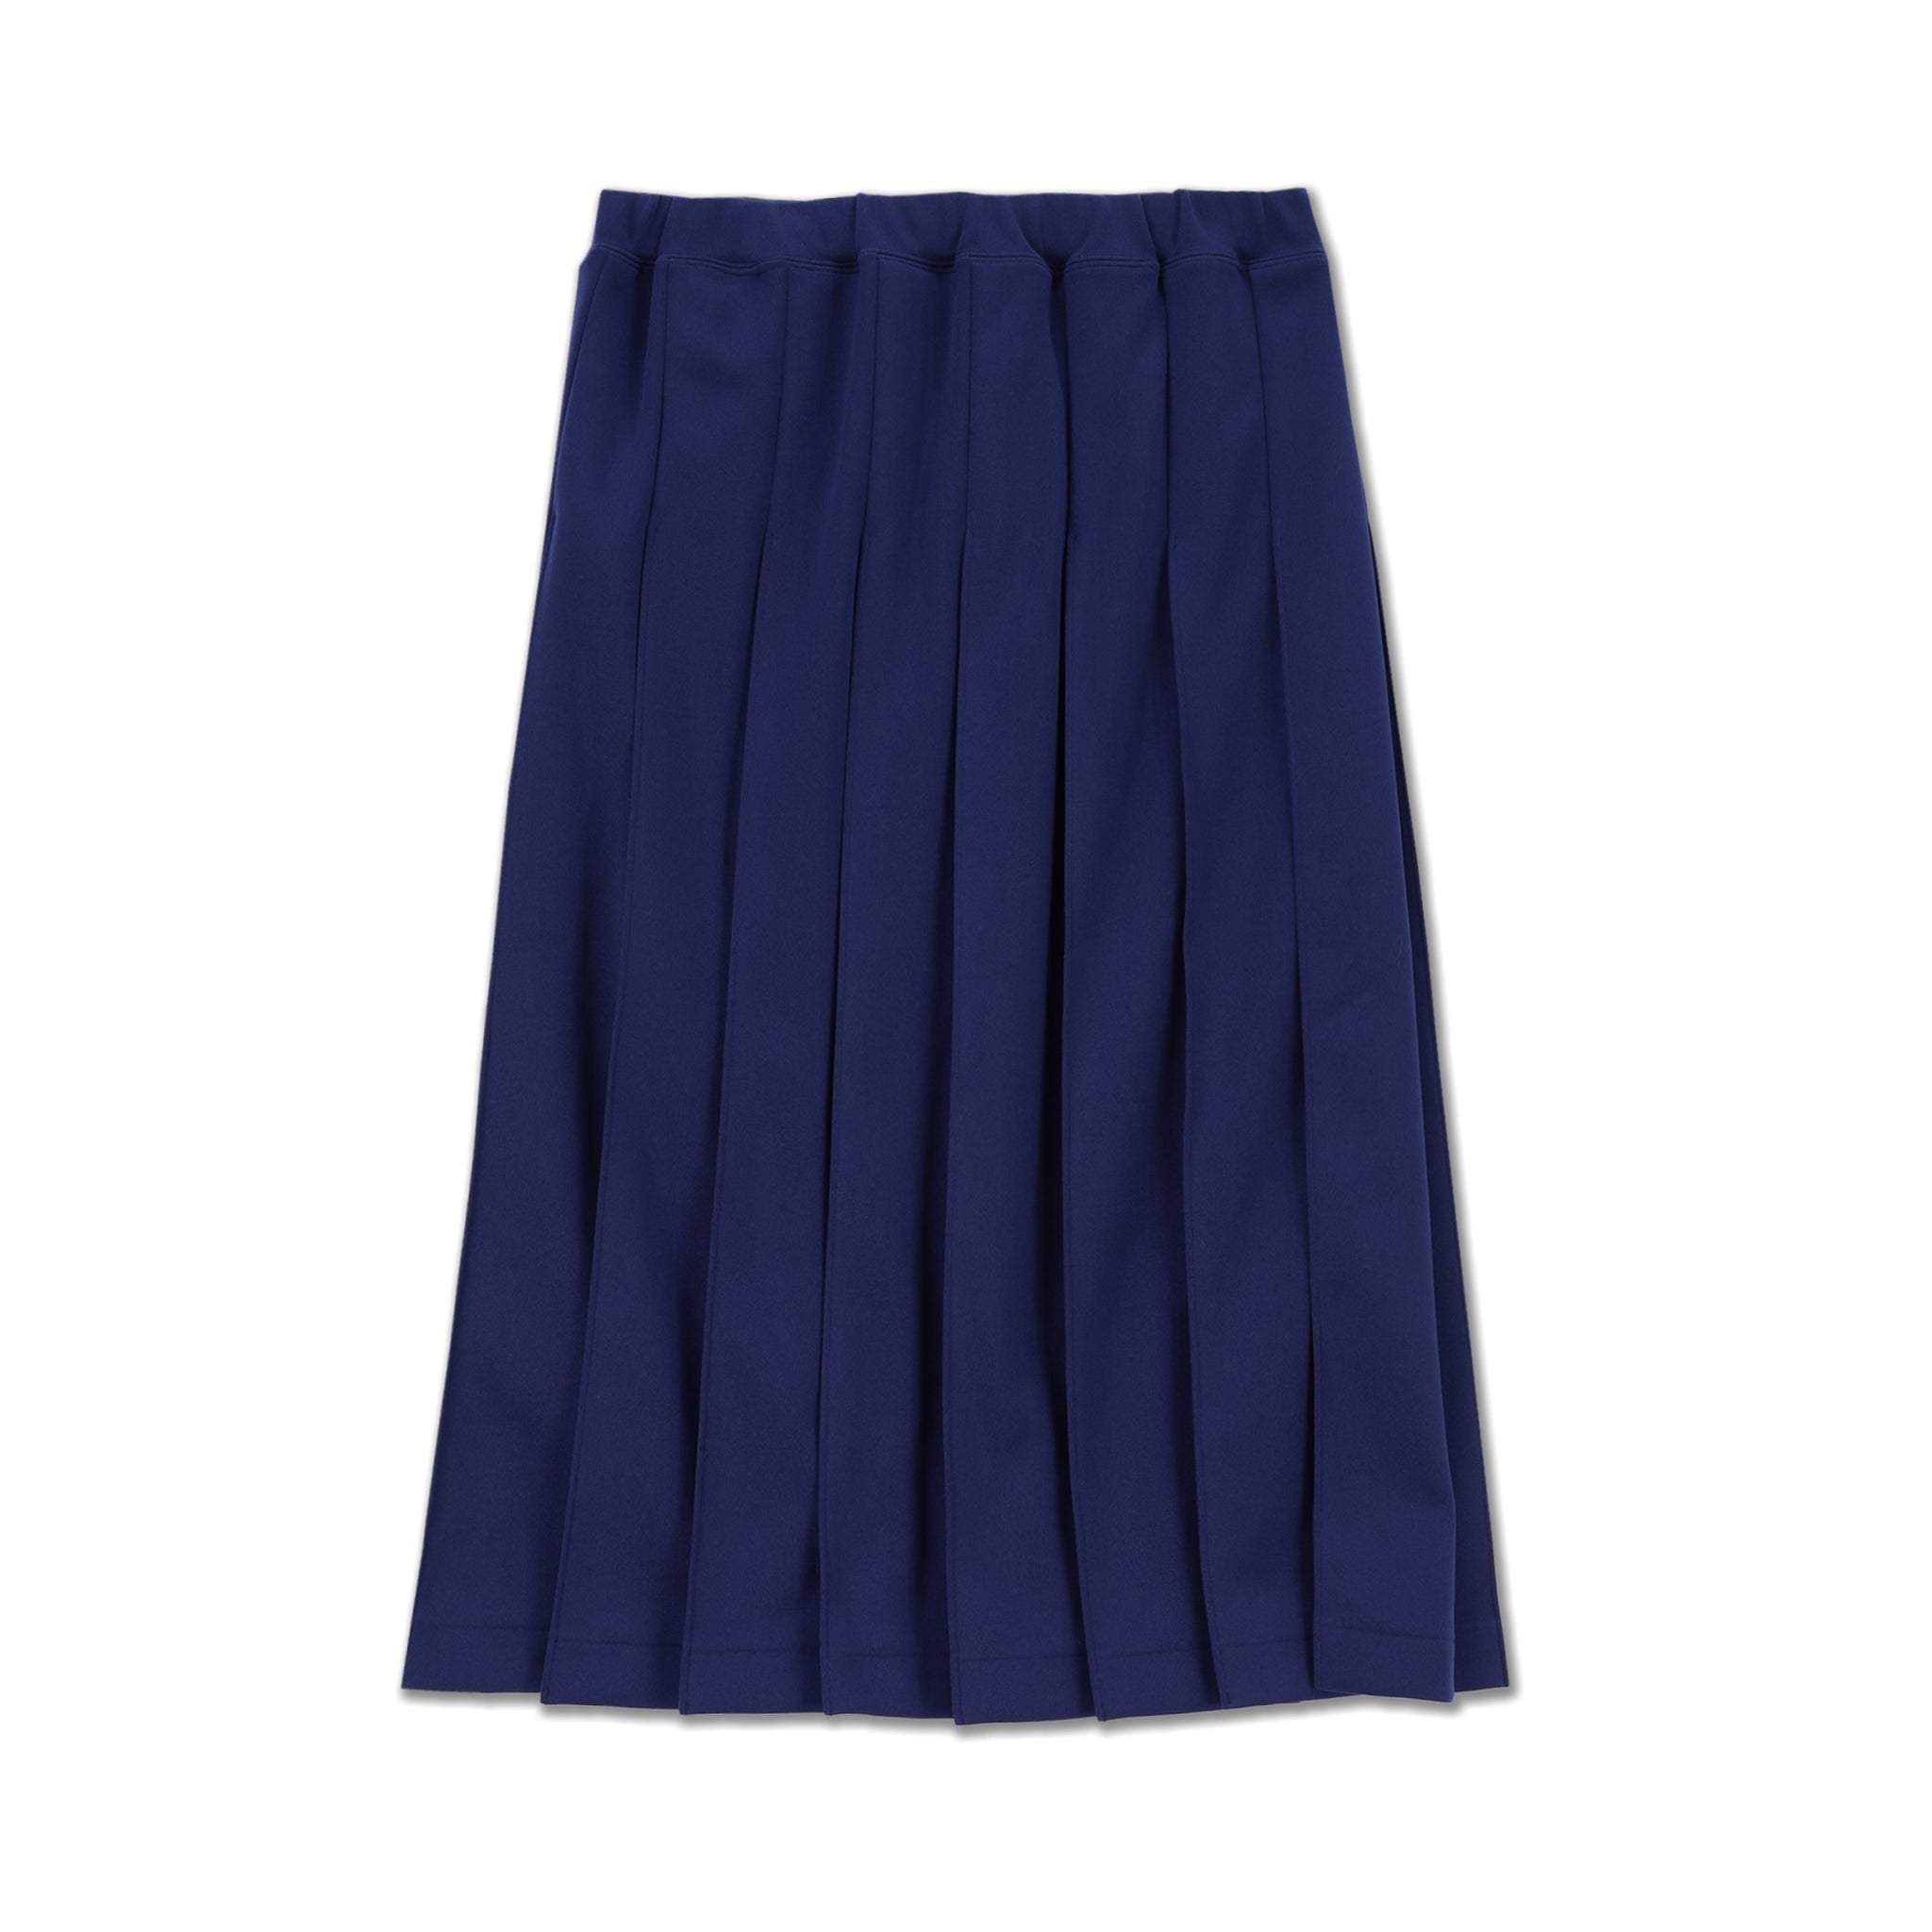 Polyester Jersey Pleated Skirt Navy